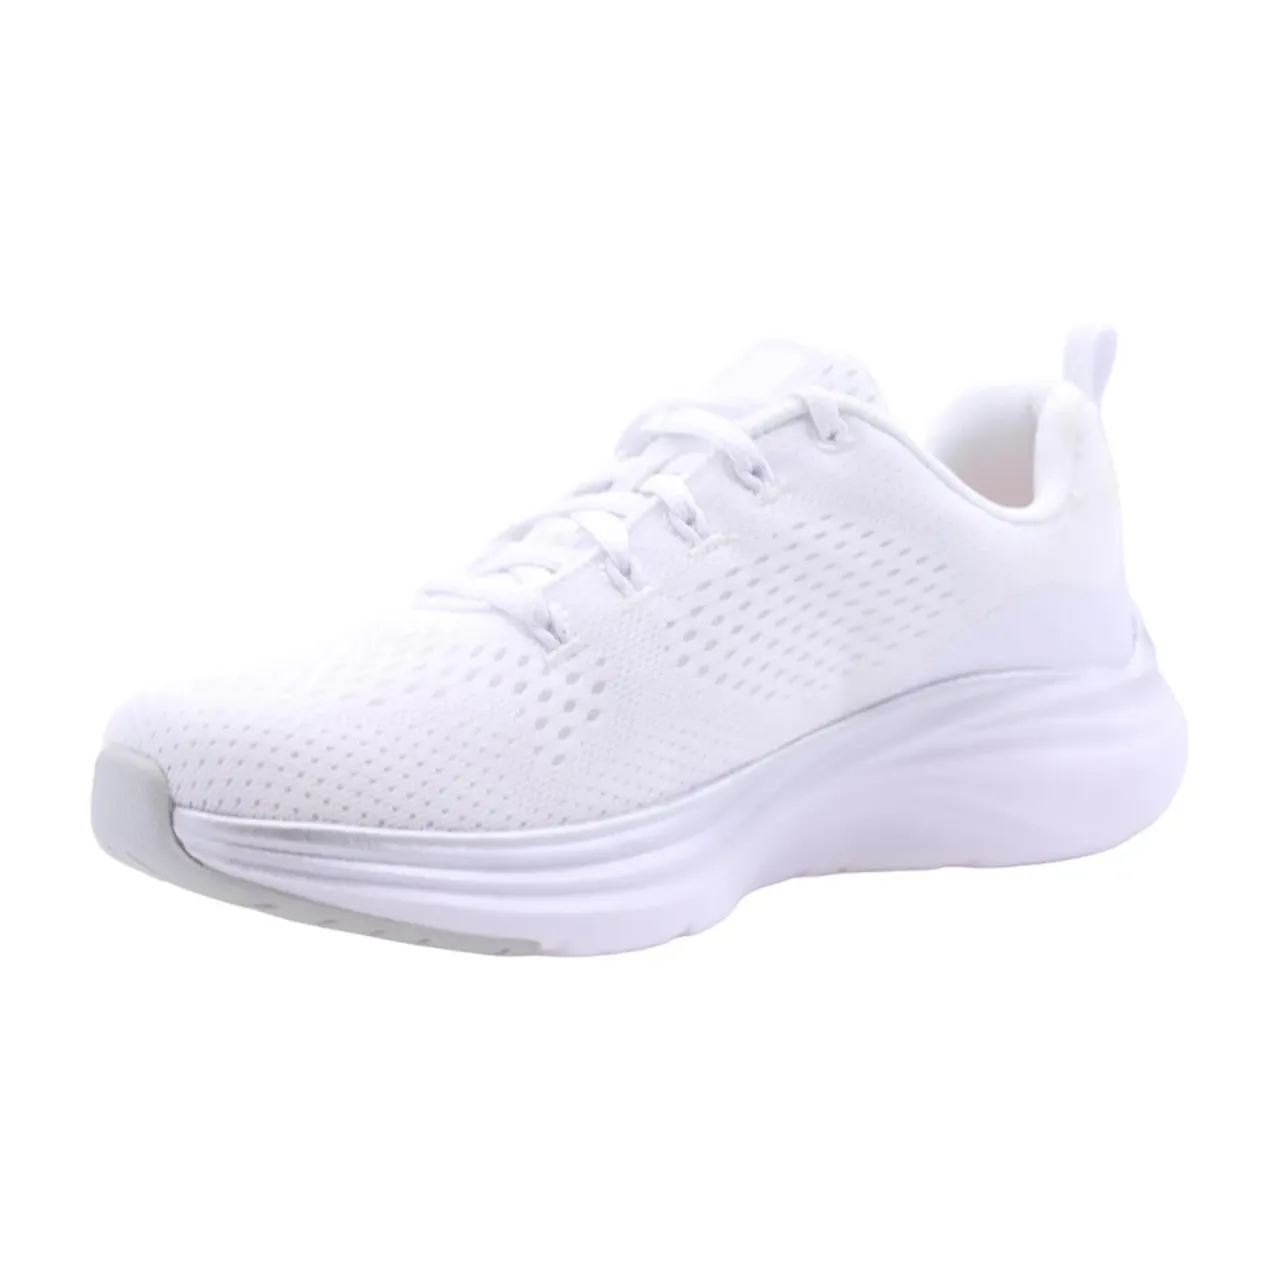 Skechers , Kyan Sneaker - Stylish and Comfortable Footwear ,White female, Sizes: